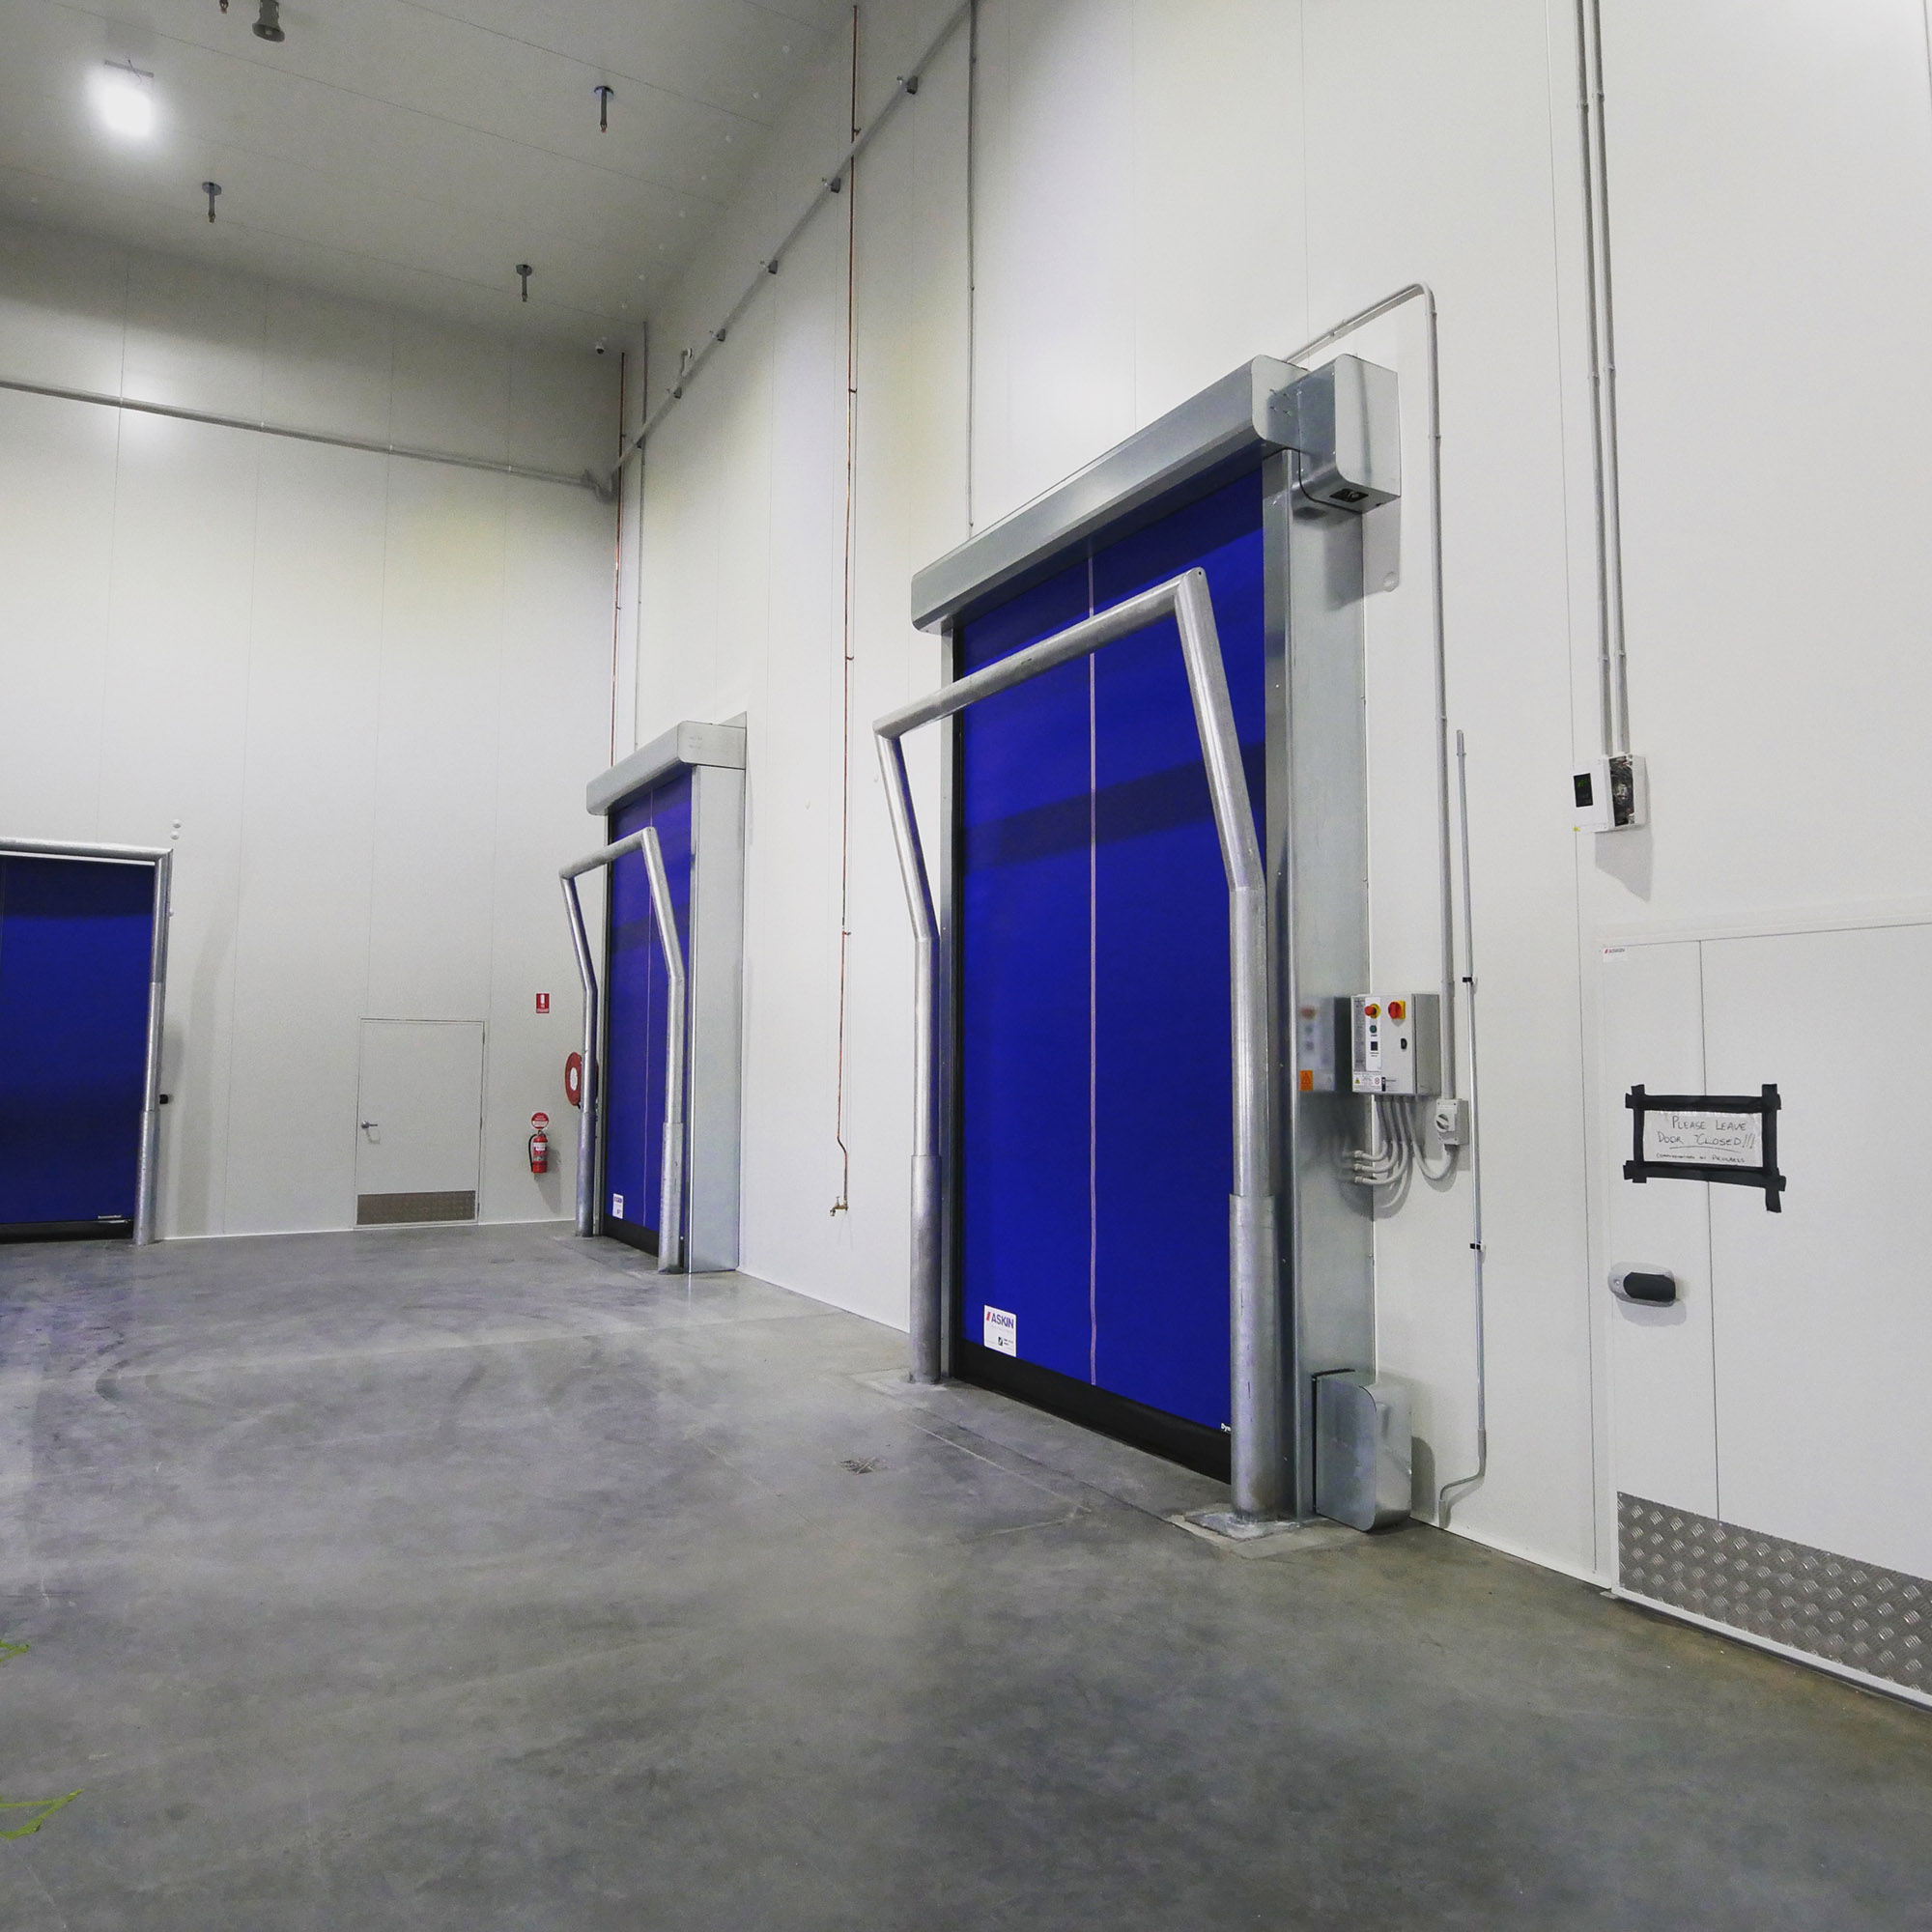 Choose the Right Hospital Doors for Safety, Efficiency, and Durability